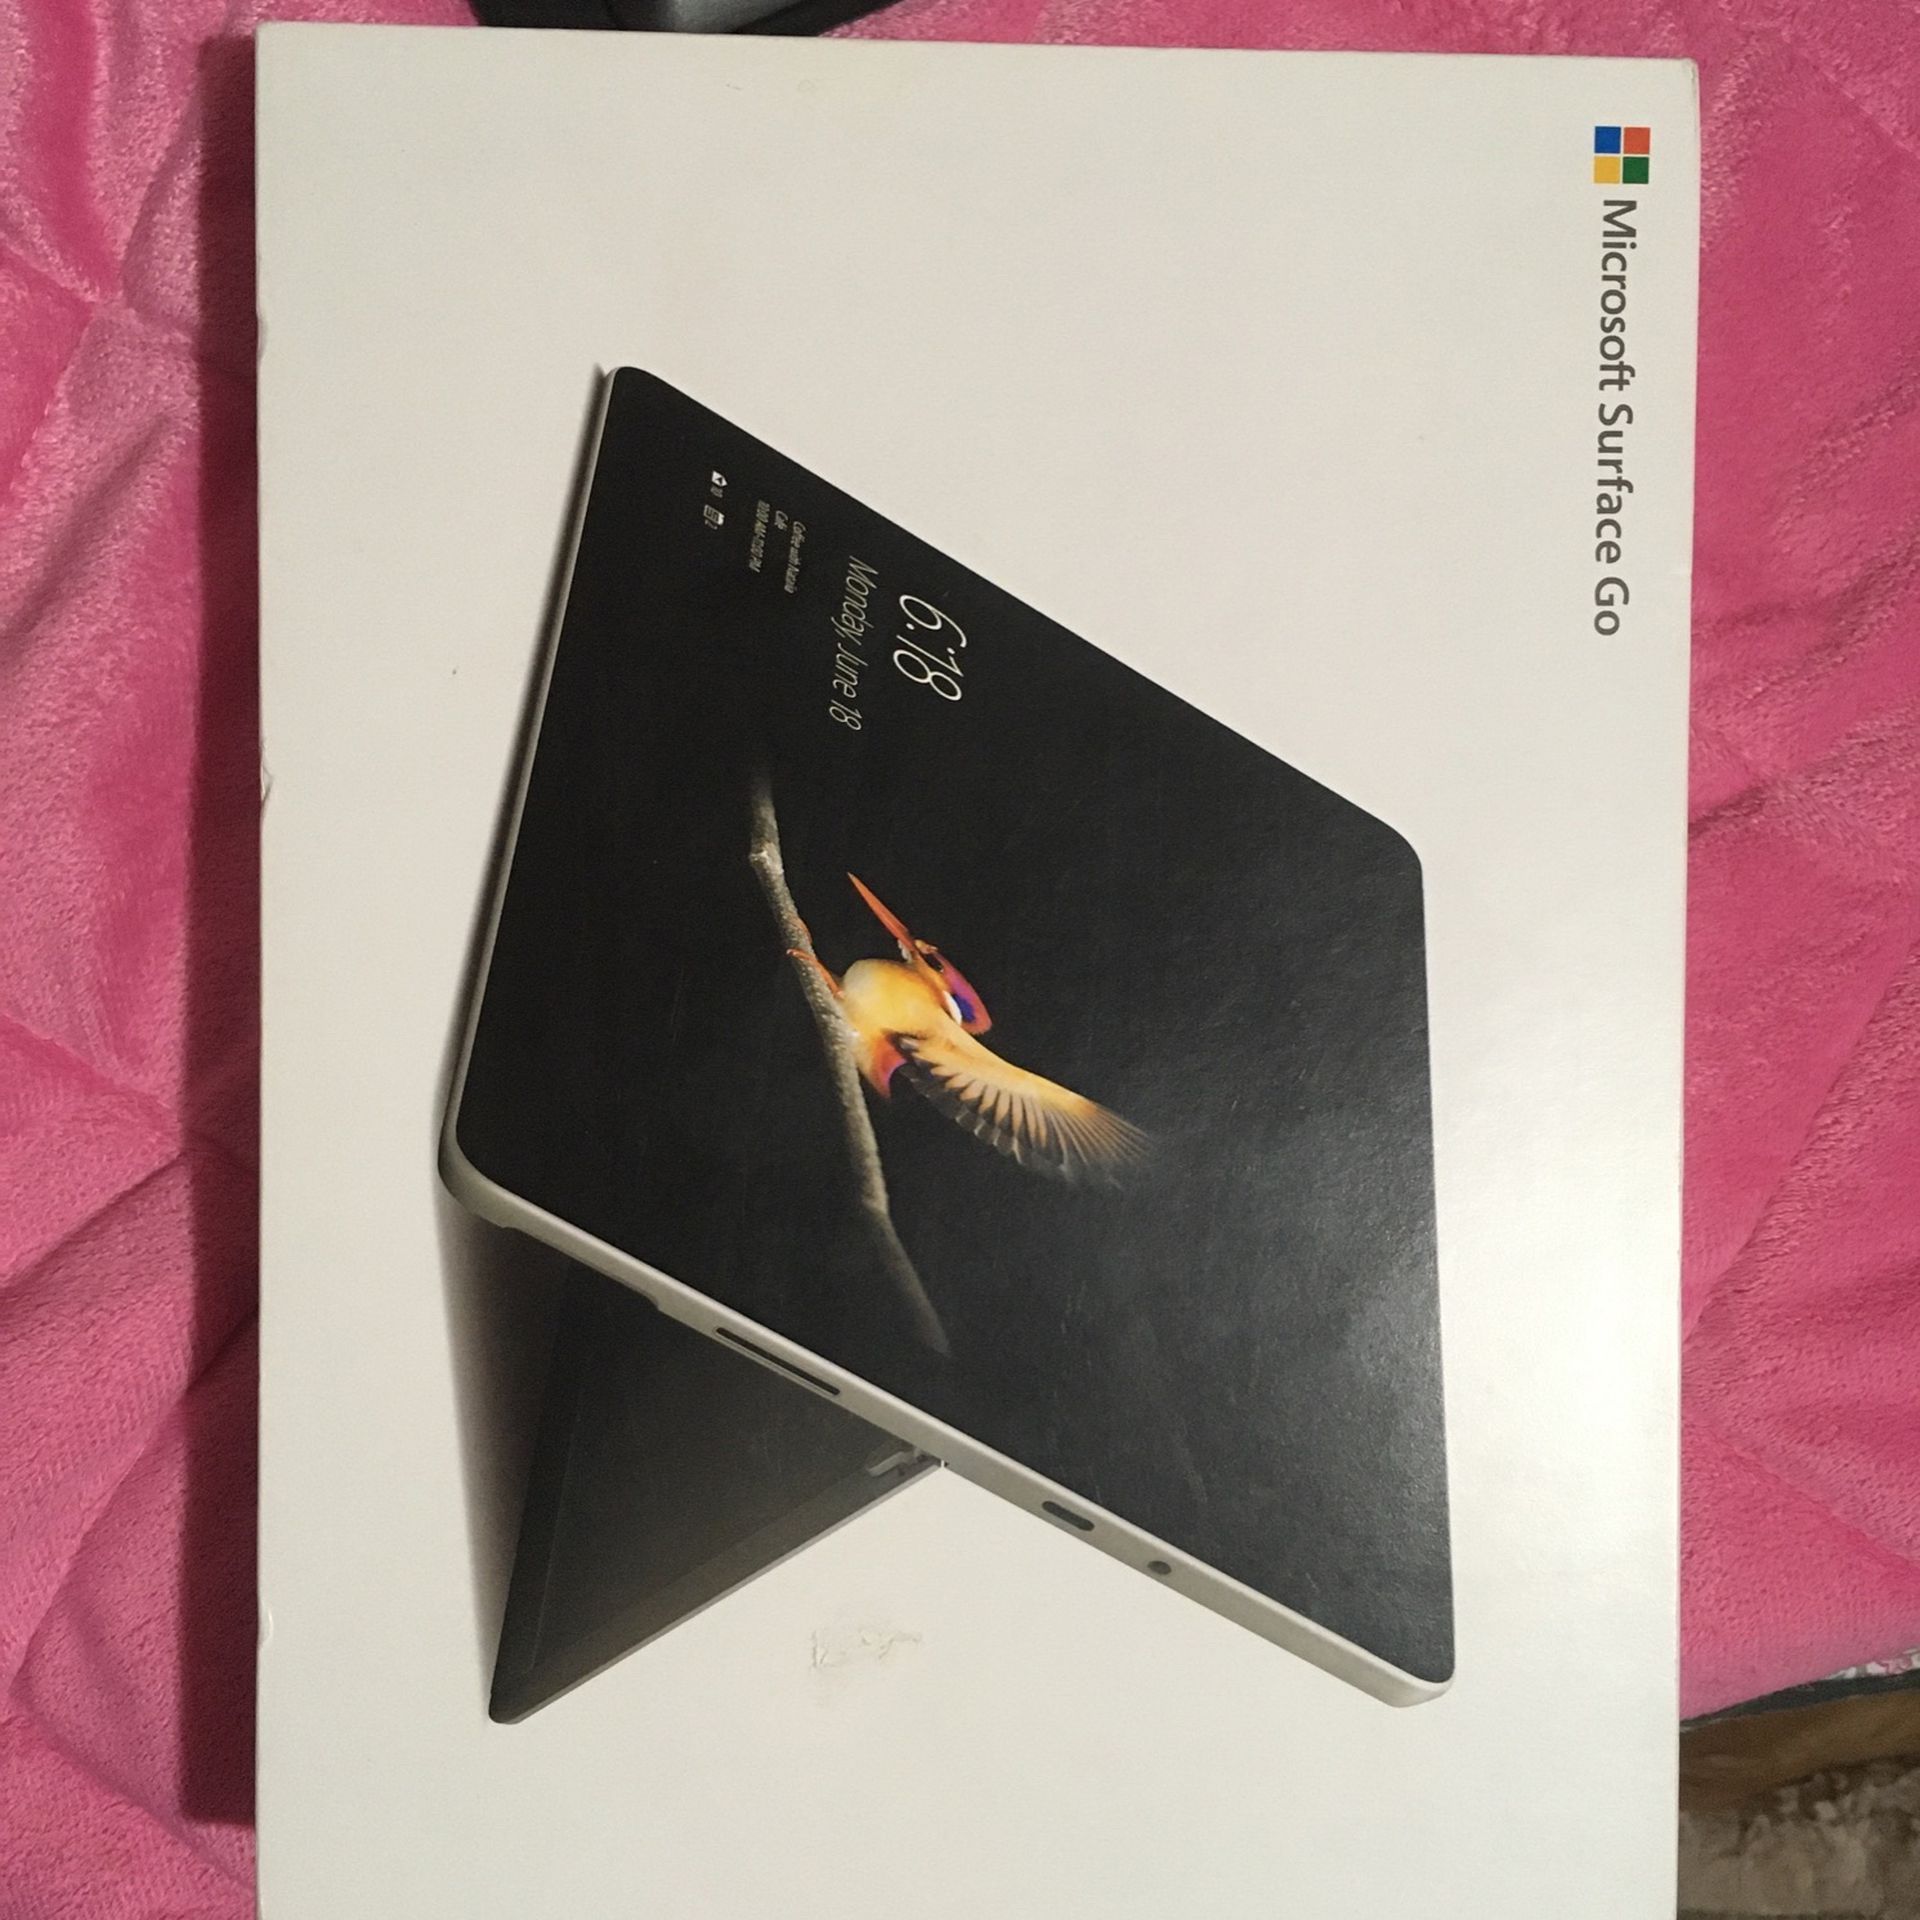 Microsoft-Surface Go 10-Touch Screen-128GB (comes with FREE: Touch Screen Pen, Charger, Computer Protect Case, and Bluetooth Multi-Color Keyboard)